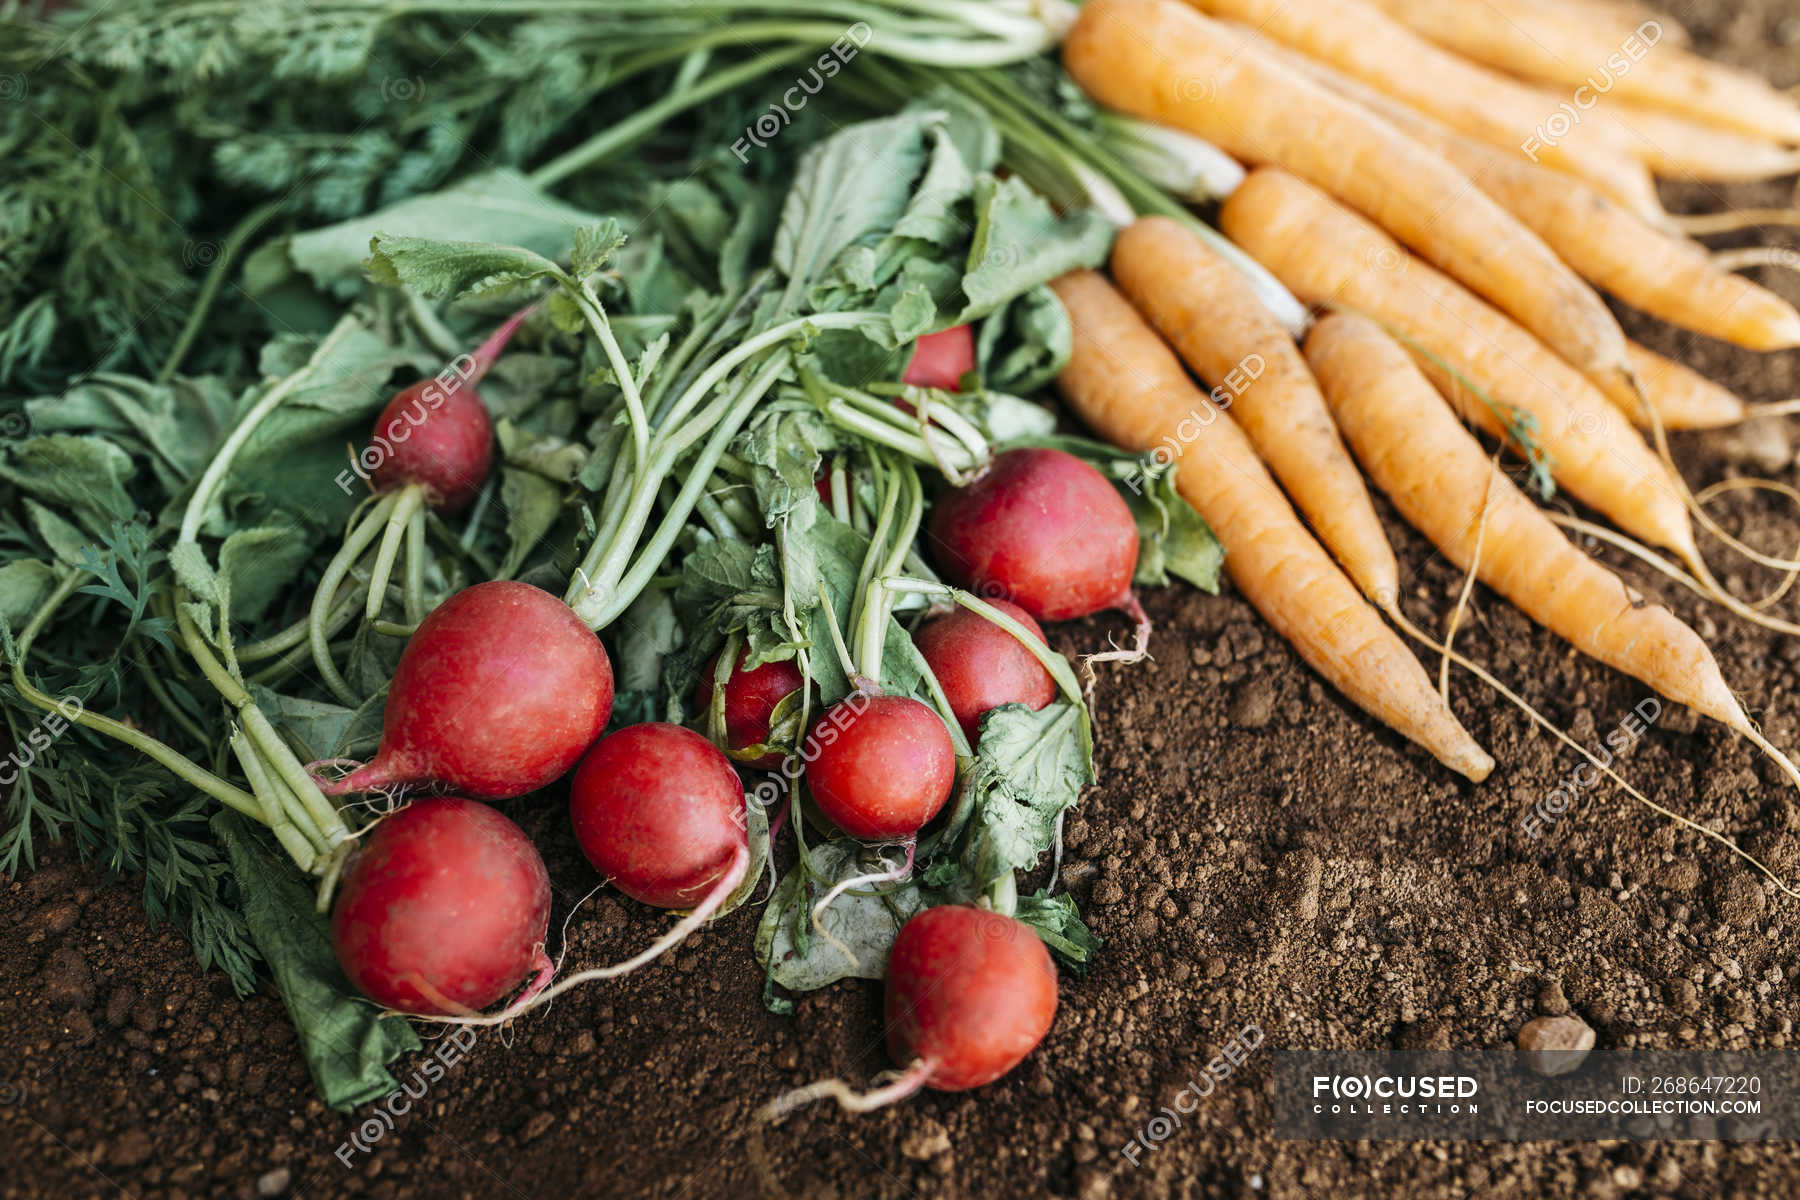 Image of Bowl of freshly harvested carrots and radishes